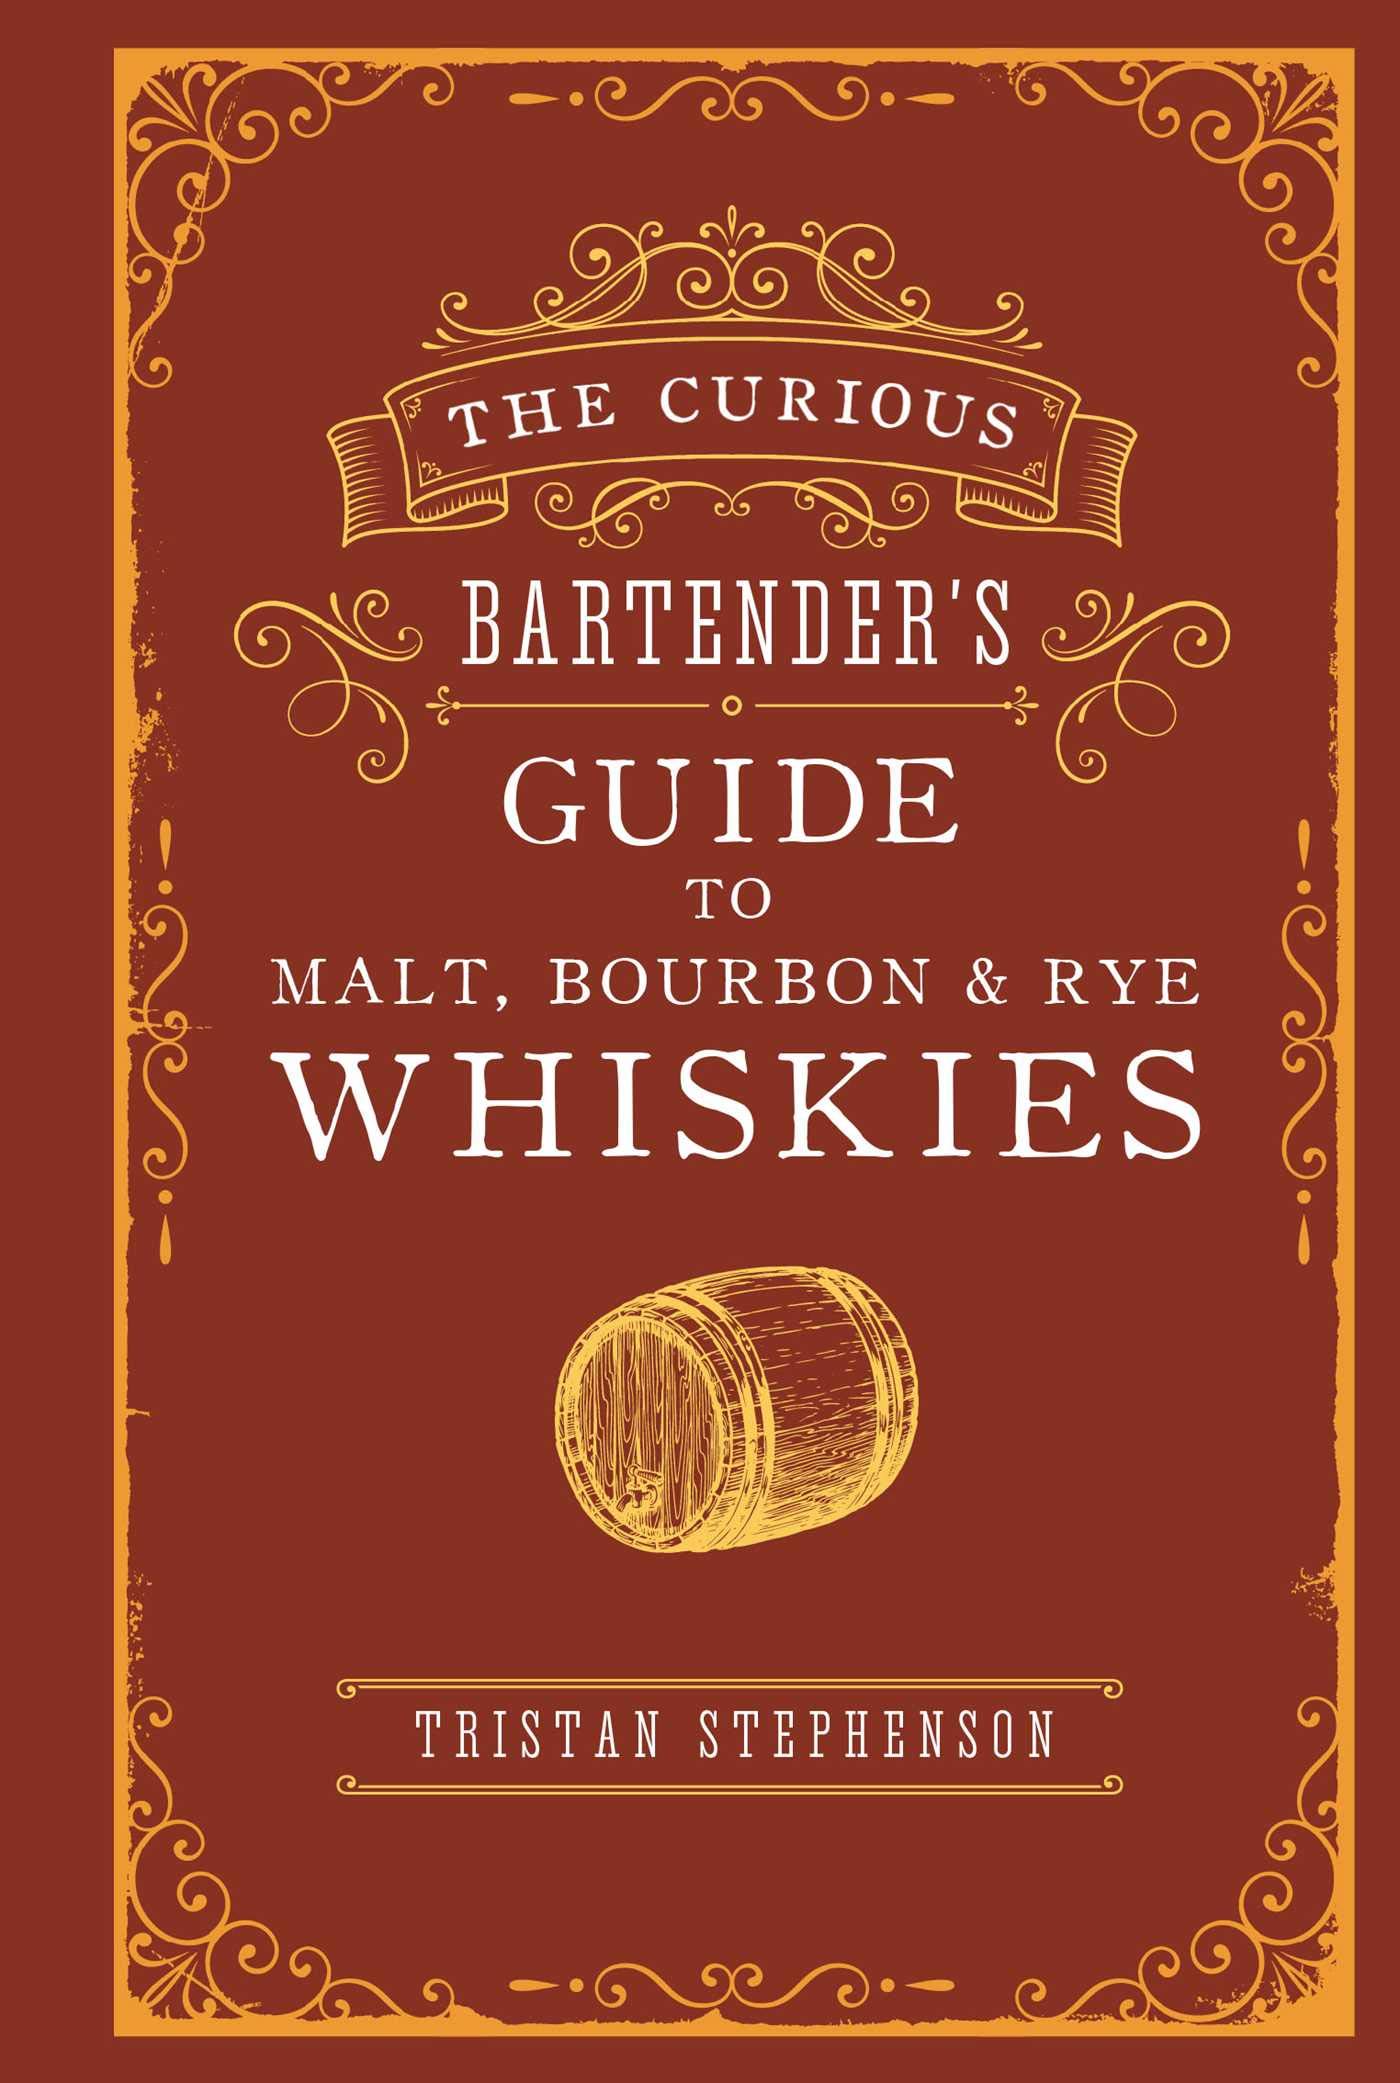 The Curious Bartender’s Guide to Malt, Bourbon & Rye Whiskies | Tristan Stephenson